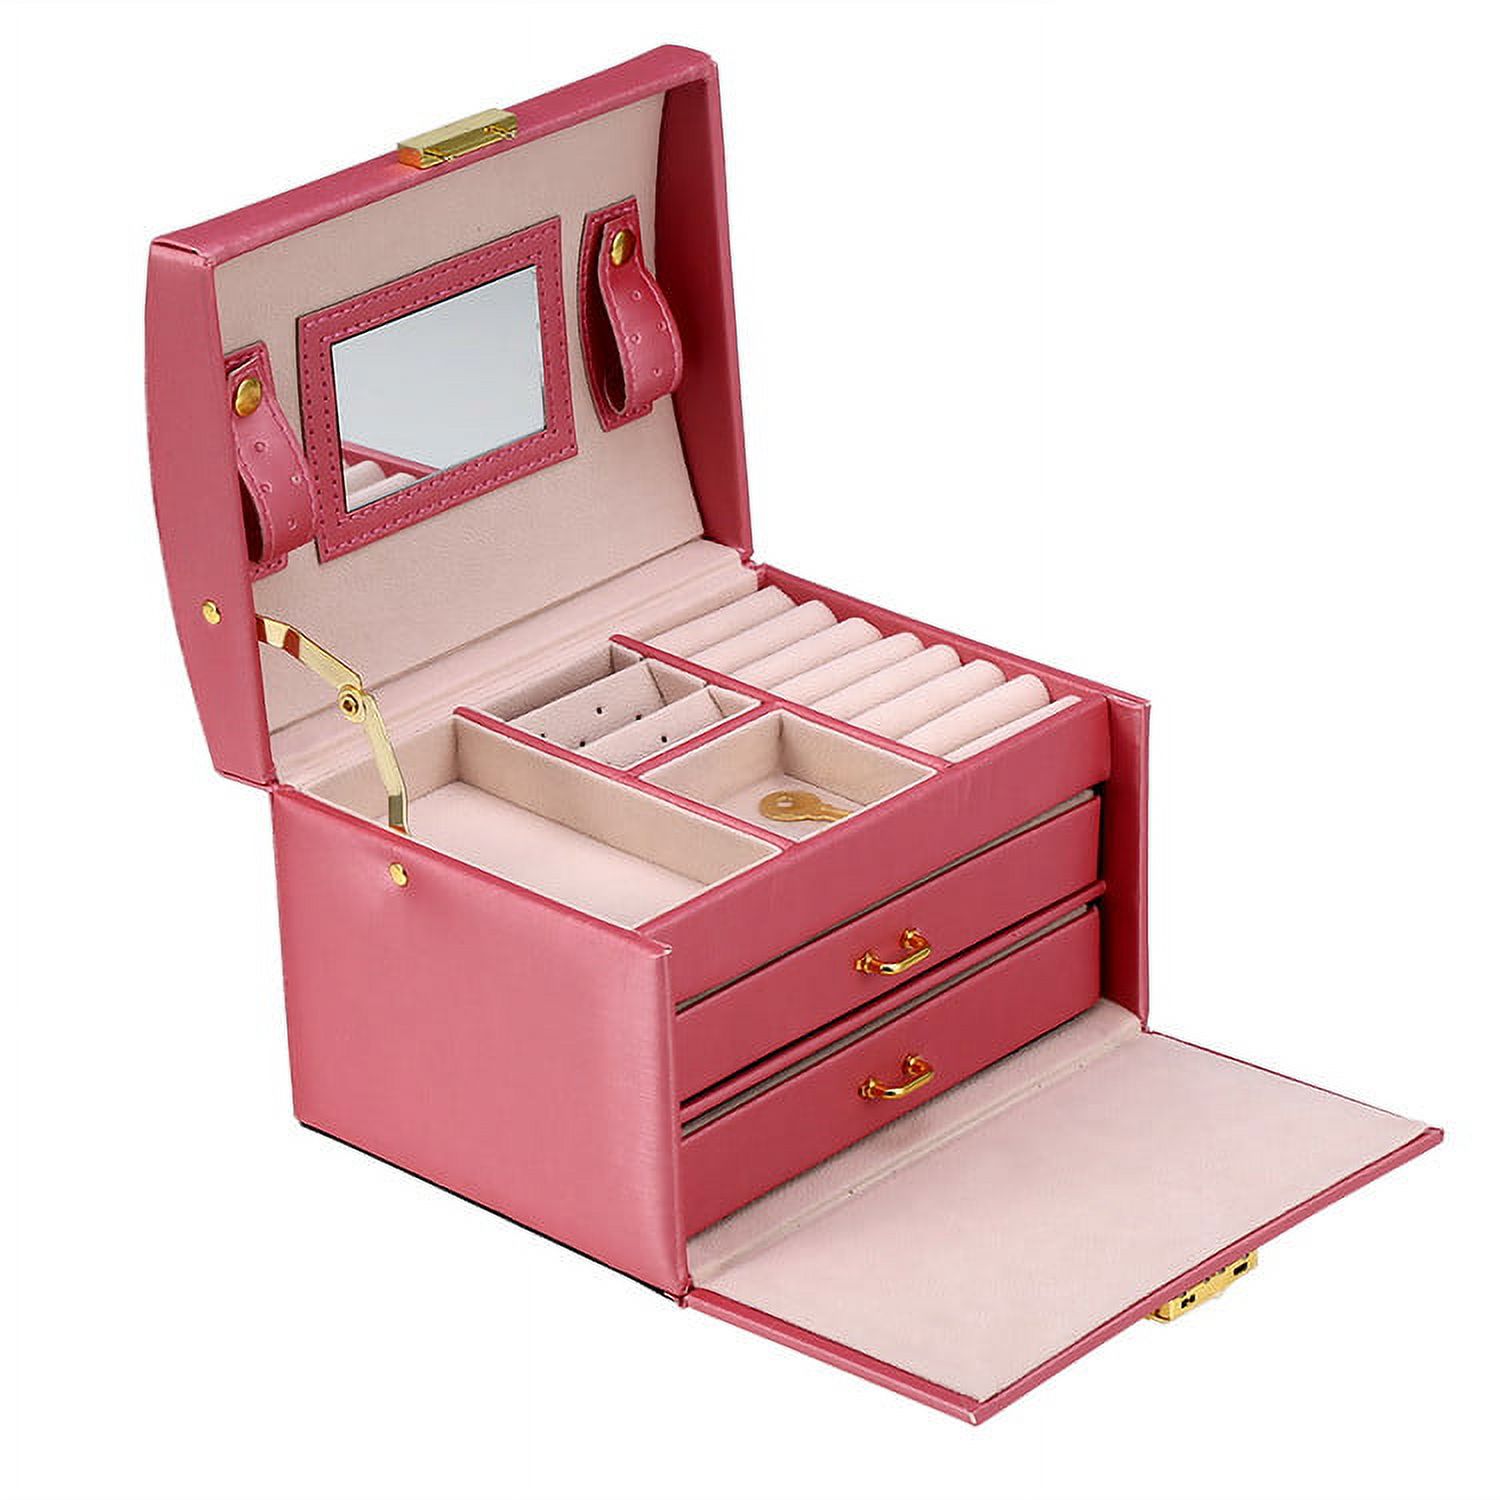 Walfront 3-Layer Girls Leather Jewelry Box and Watch Organizers, Lockable, Mirror, Pink - image 4 of 4